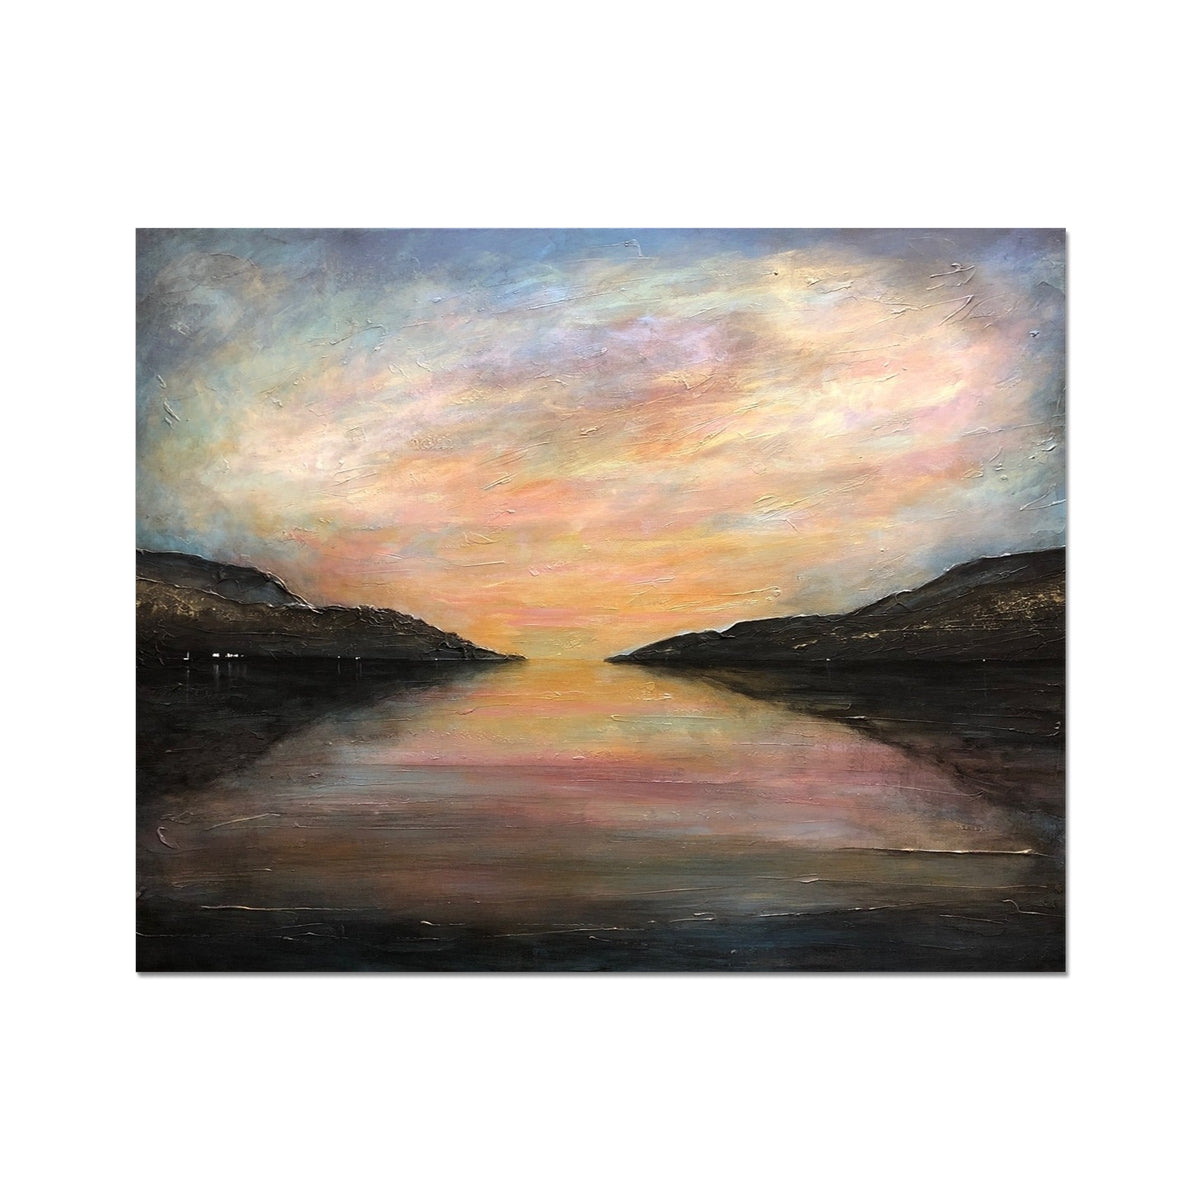 Loch Ness Glow Painting | Hahnemühle German Etching Prints From Scotland-Fine art-Scottish Lochs & Mountains Art Gallery-20"x16"-Paintings, Prints, Homeware, Art Gifts From Scotland By Scottish Artist Kevin Hunter